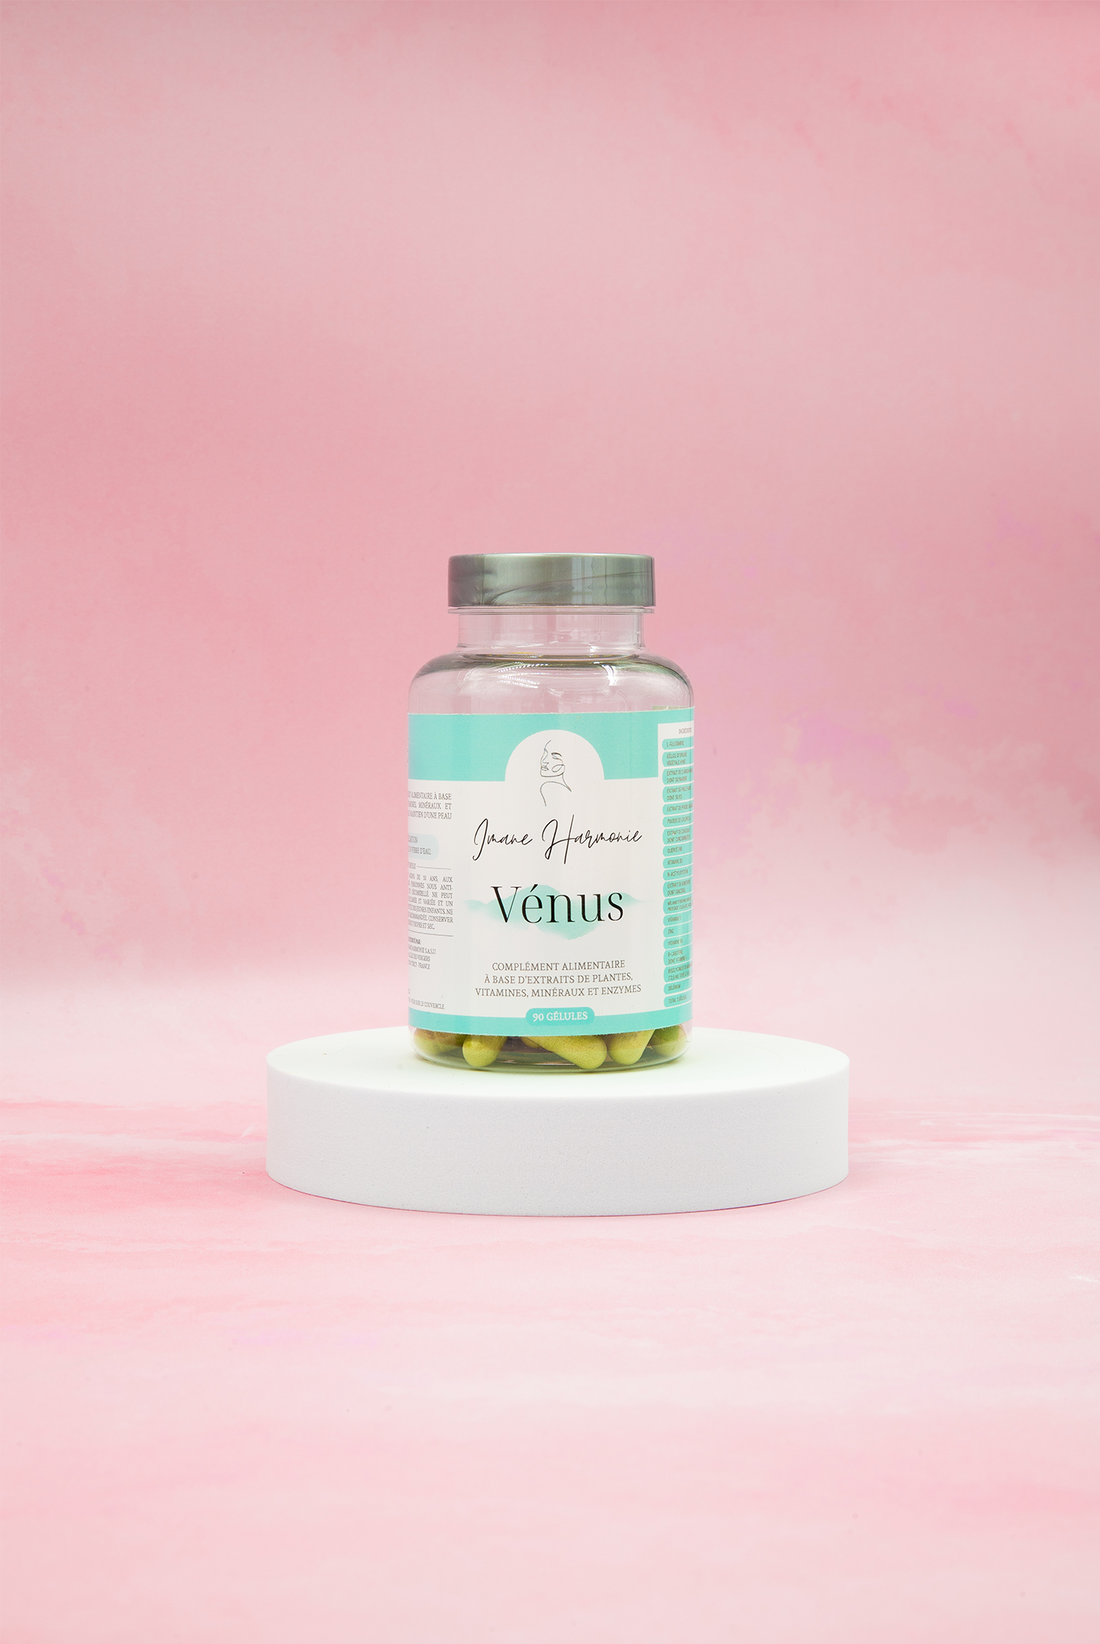 Dietary supplement Venus to improve the quality of your skin and fight acne